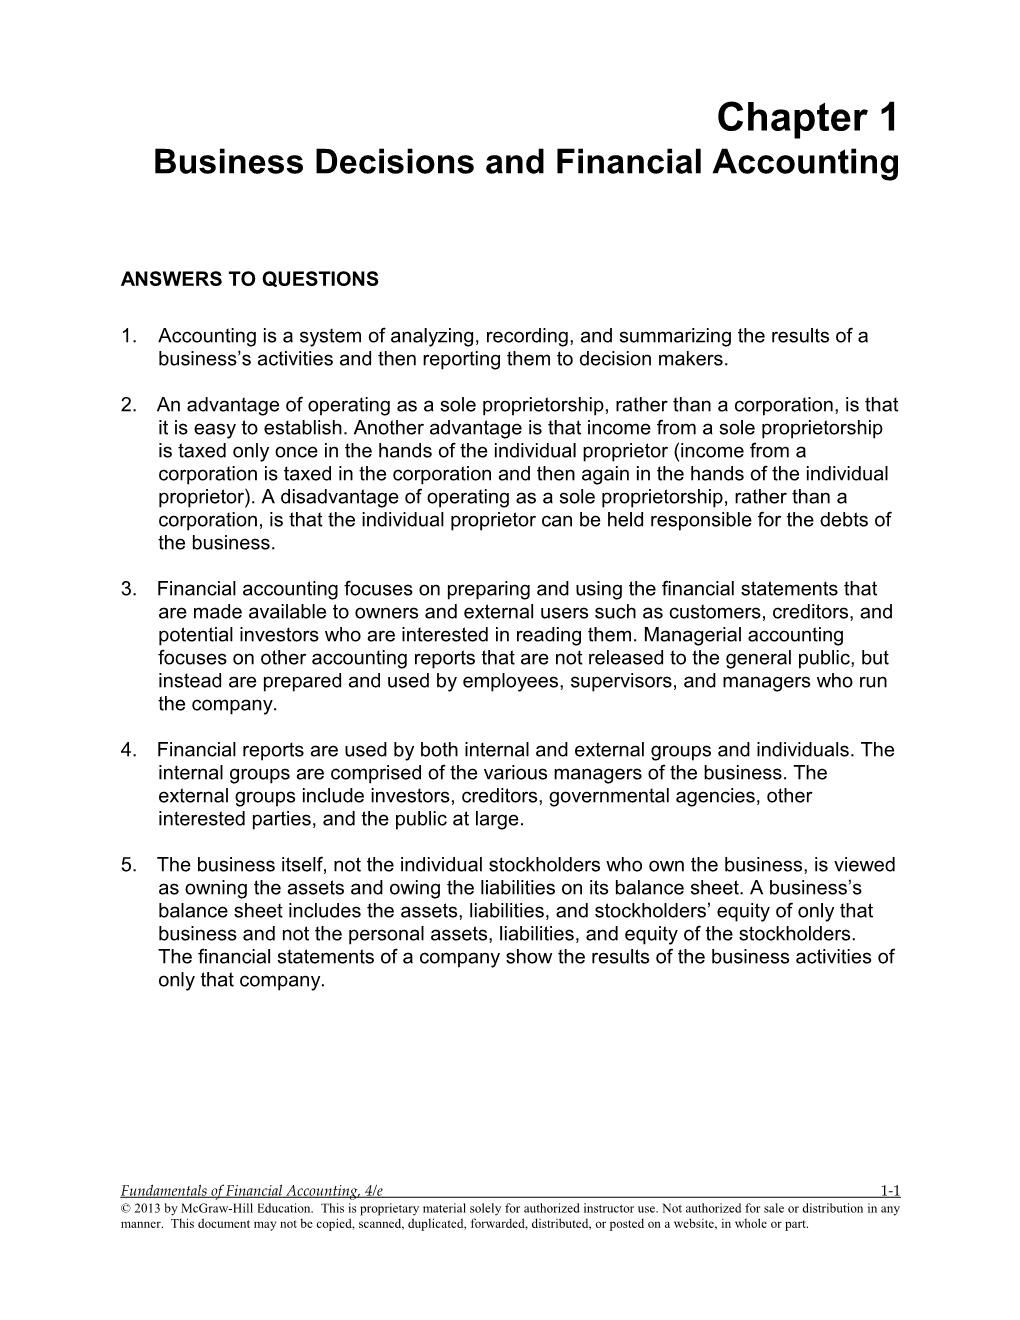 Business Decisions and Financial Accounting